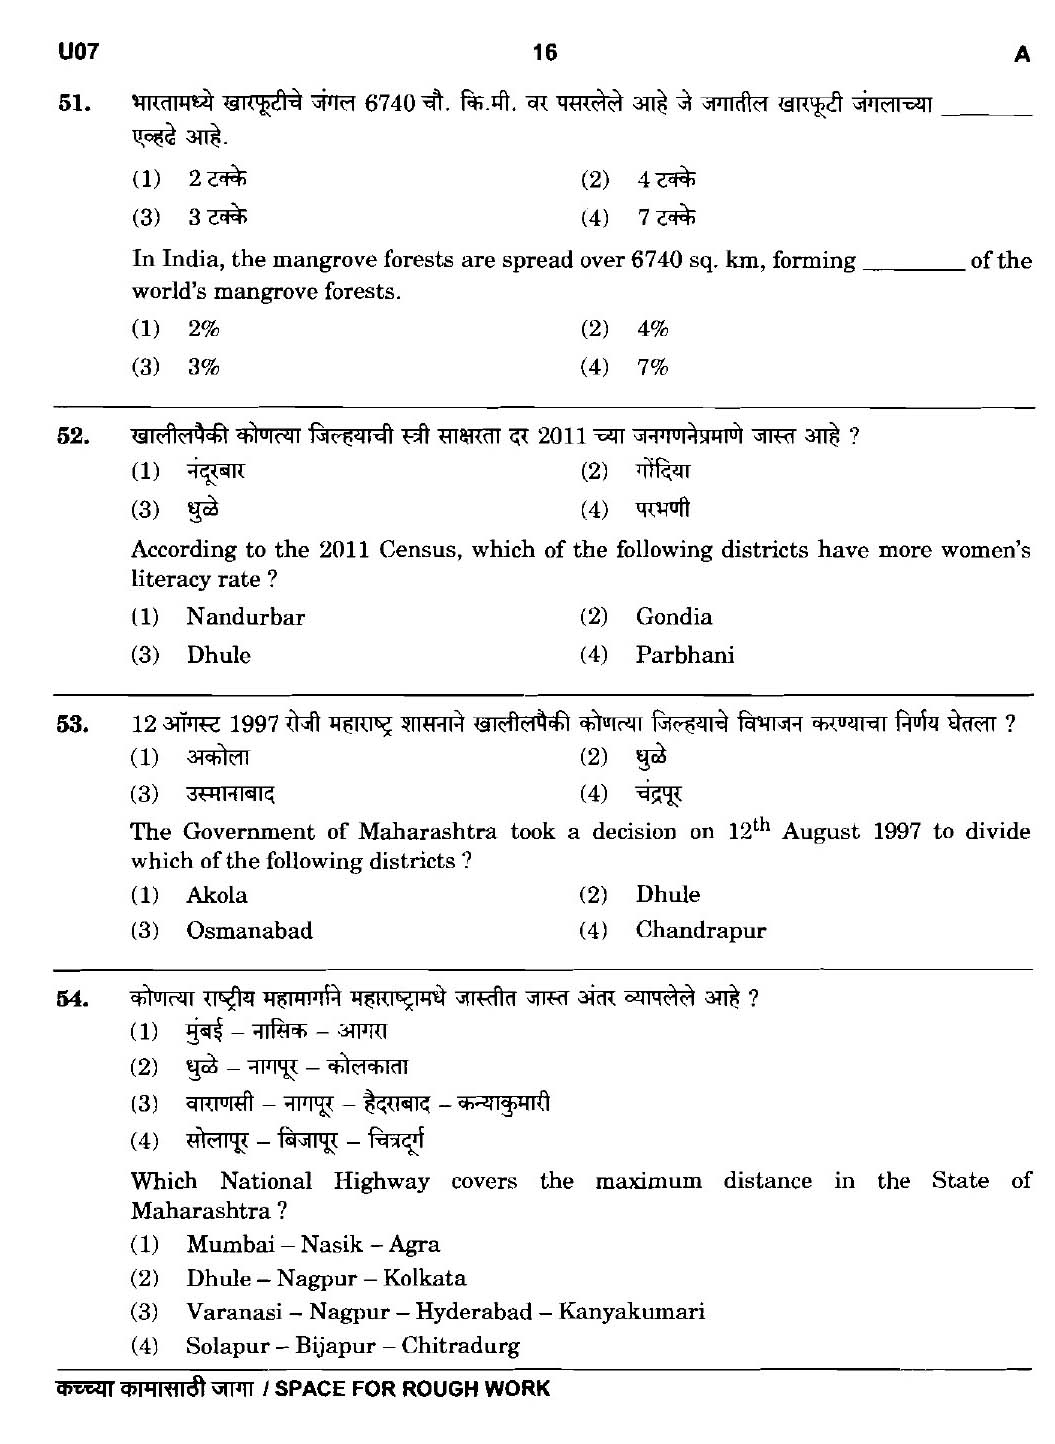 MPSC Agricultural Services Preliminary Exam 2016 Question Paper 15